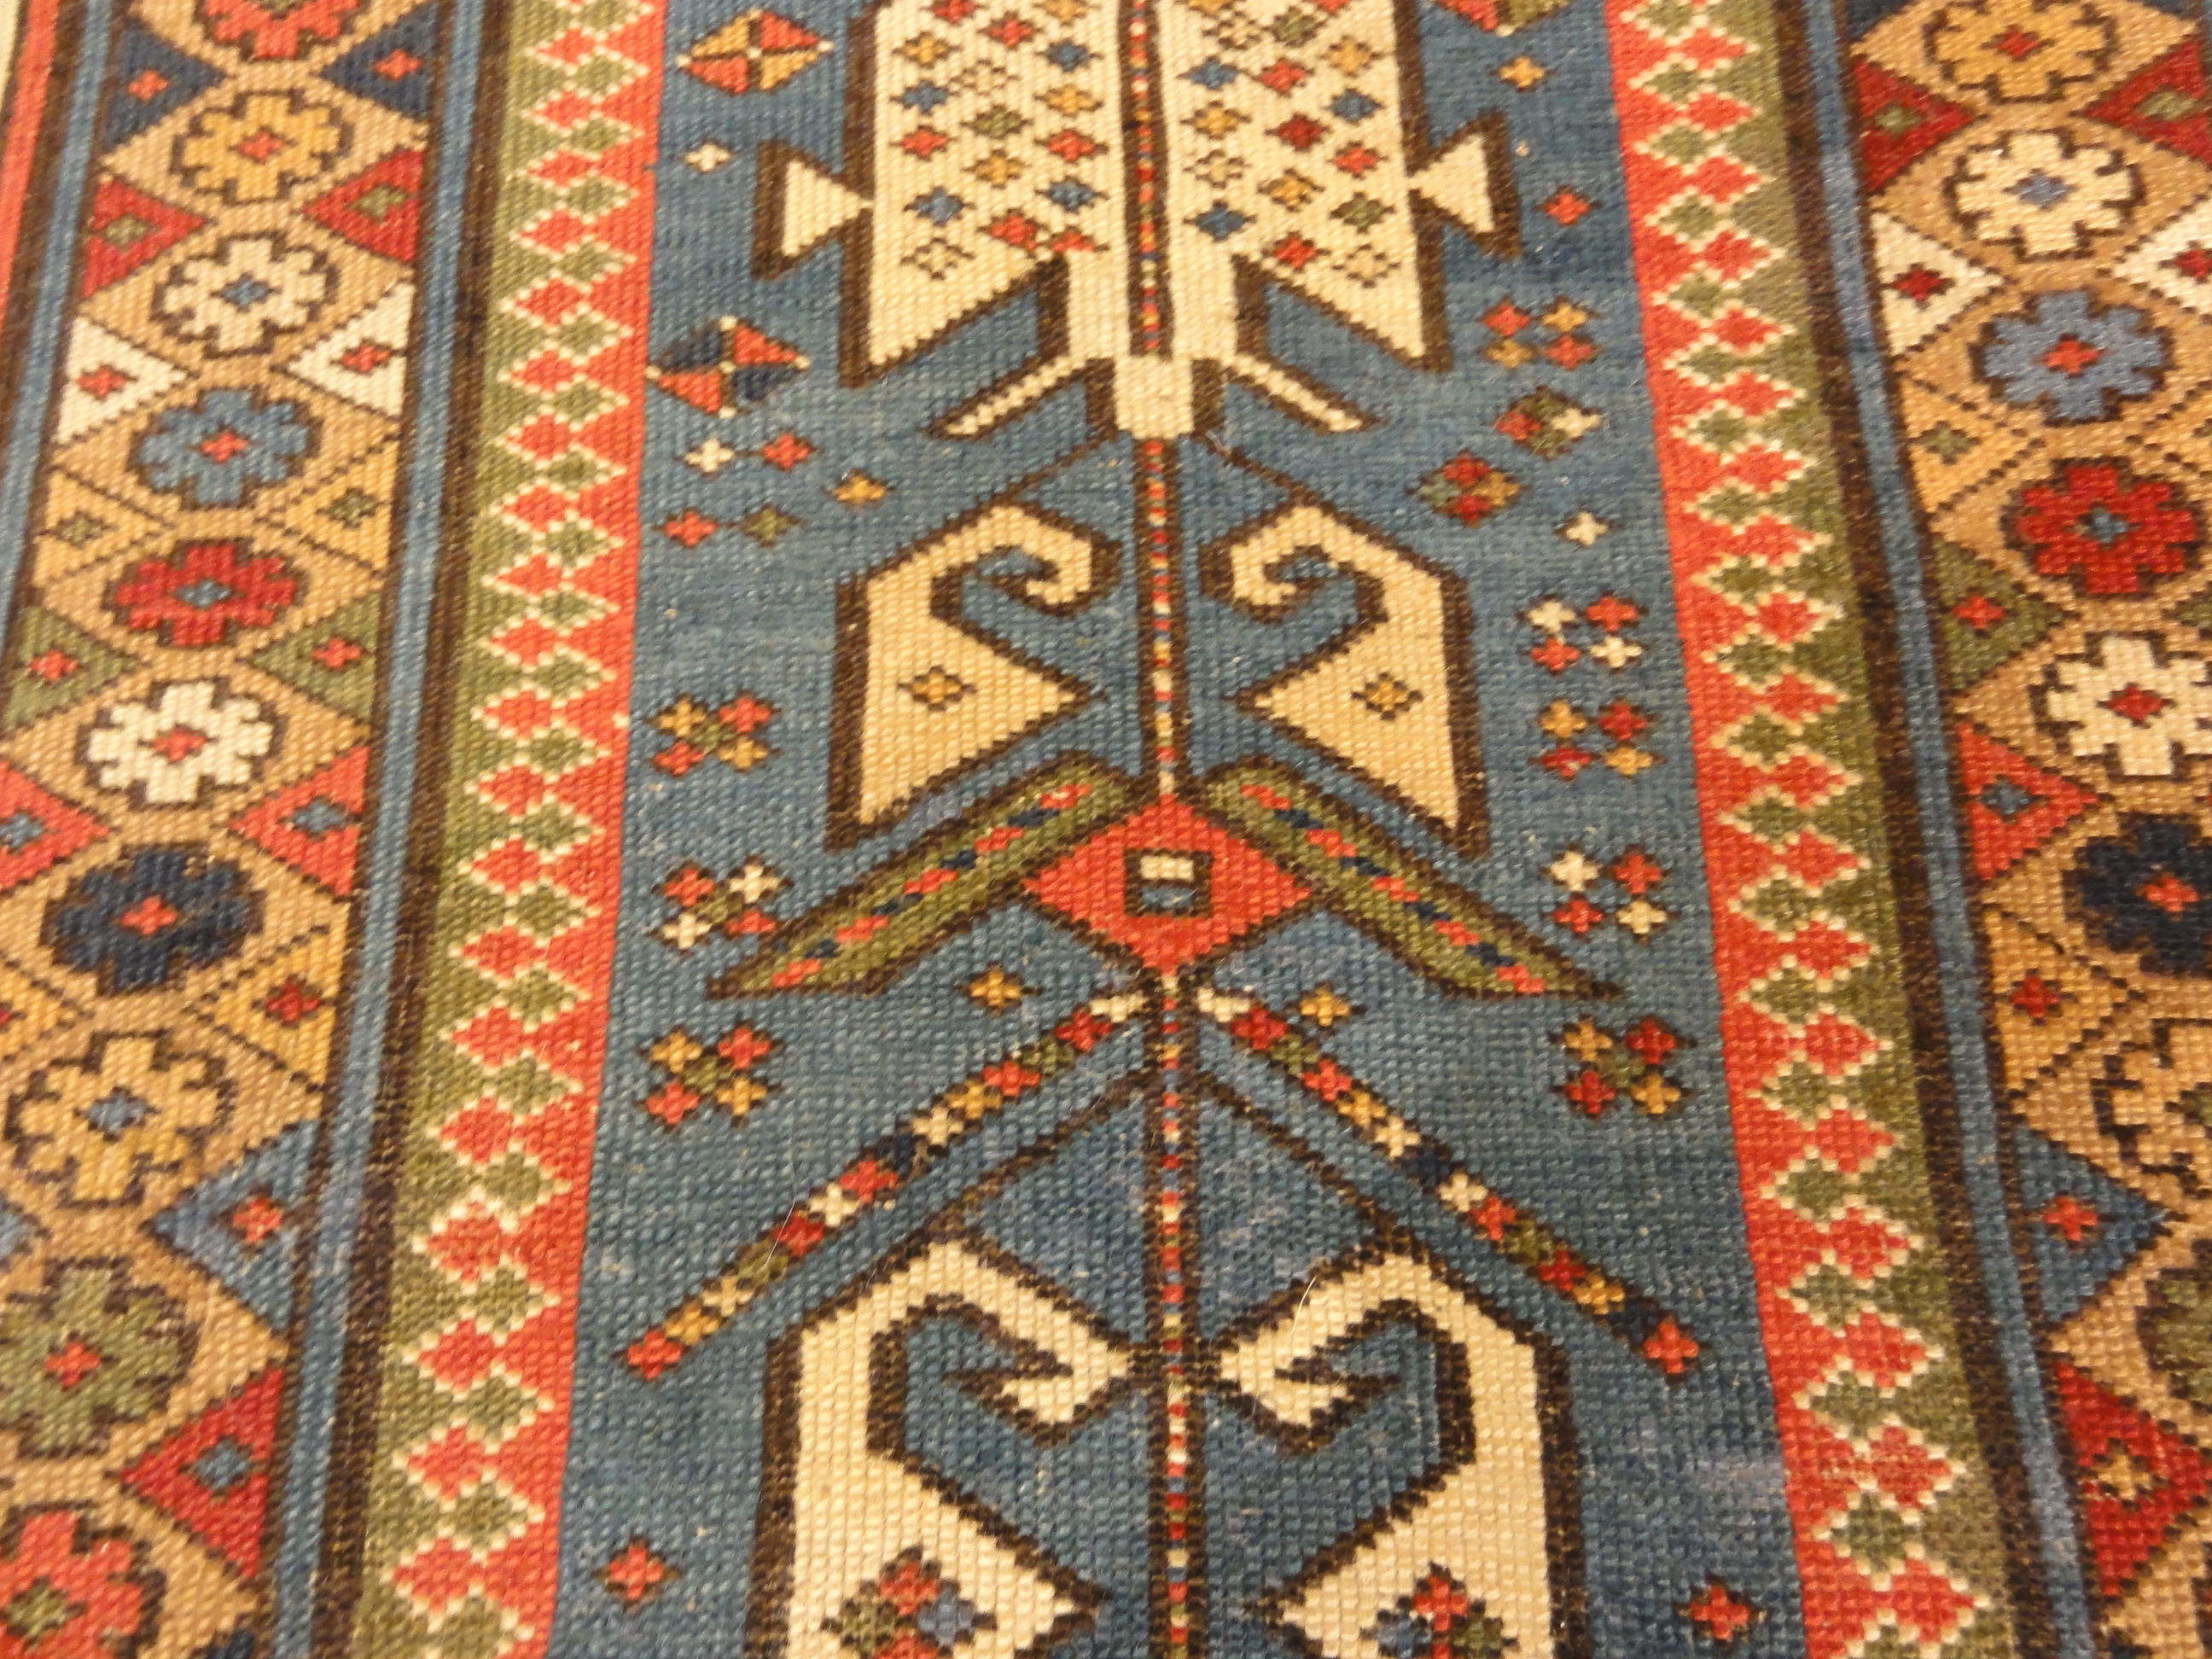 Antique Early 19th Century Shirvan Runner Rug. A piece of genuine authentic woven carpet art sold by the Santa Barbara Design Center Rugs and More.